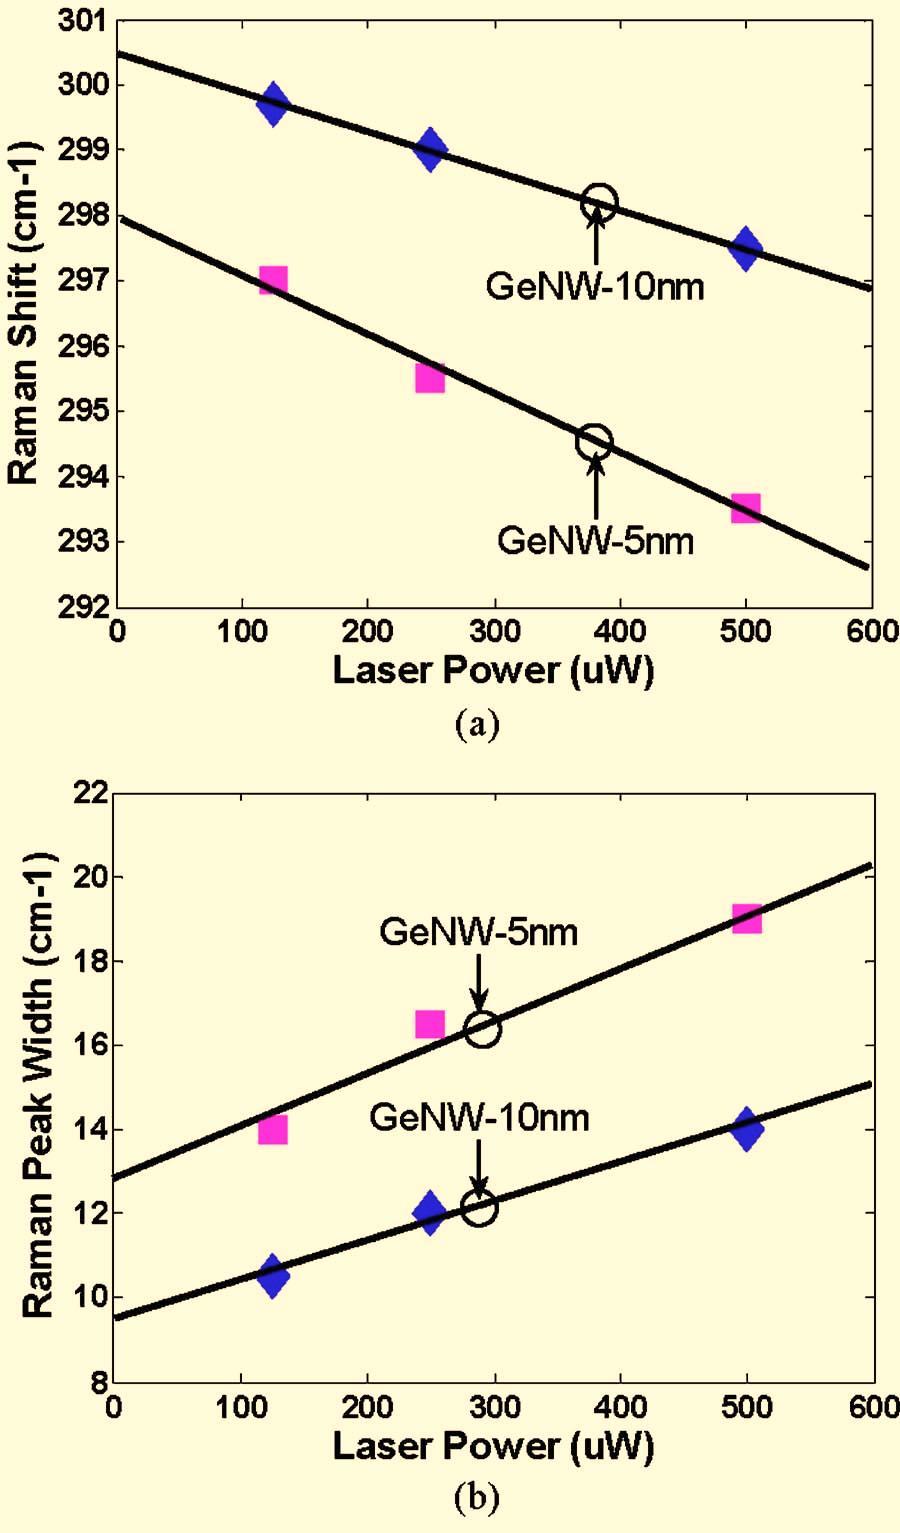 Color online a Raman Stokes peak of bulk Ge with different excitation powers; b Raman Stokes peak of 10 nm GeNWs with different excitation powers; c Raman Stokes peak of 5 nm GeNWs with different